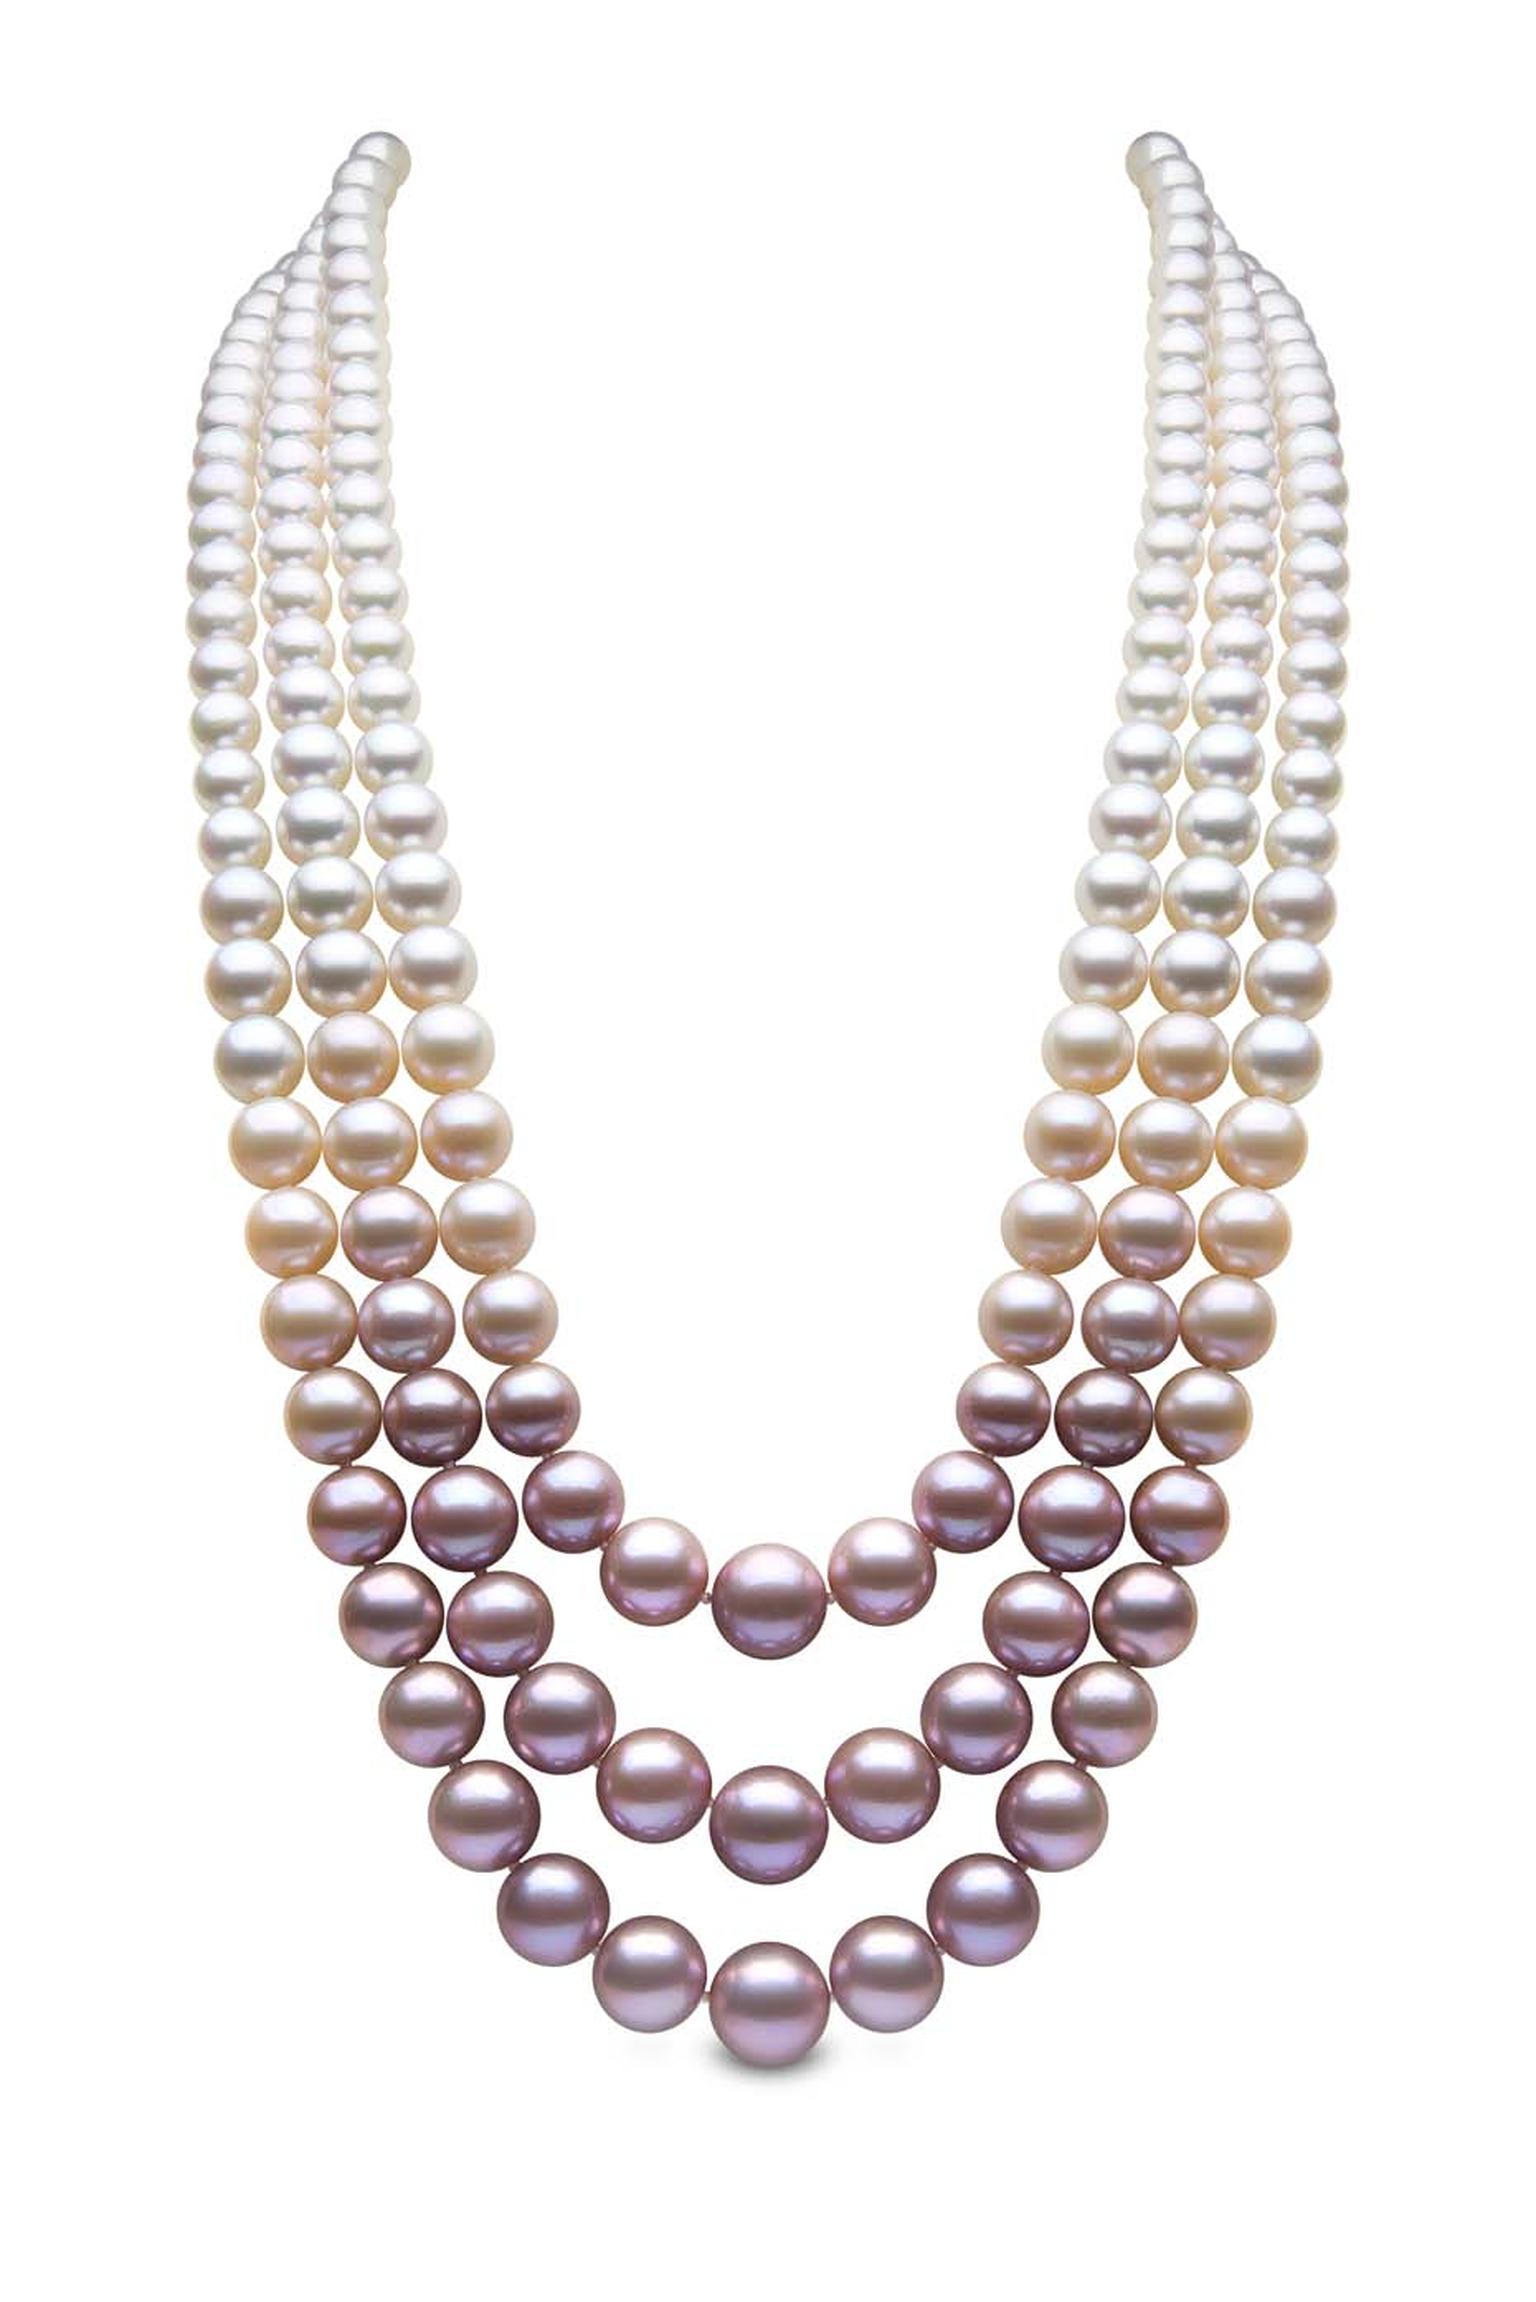 The history of pearls: one of nature's greatest miracles and its use in ...